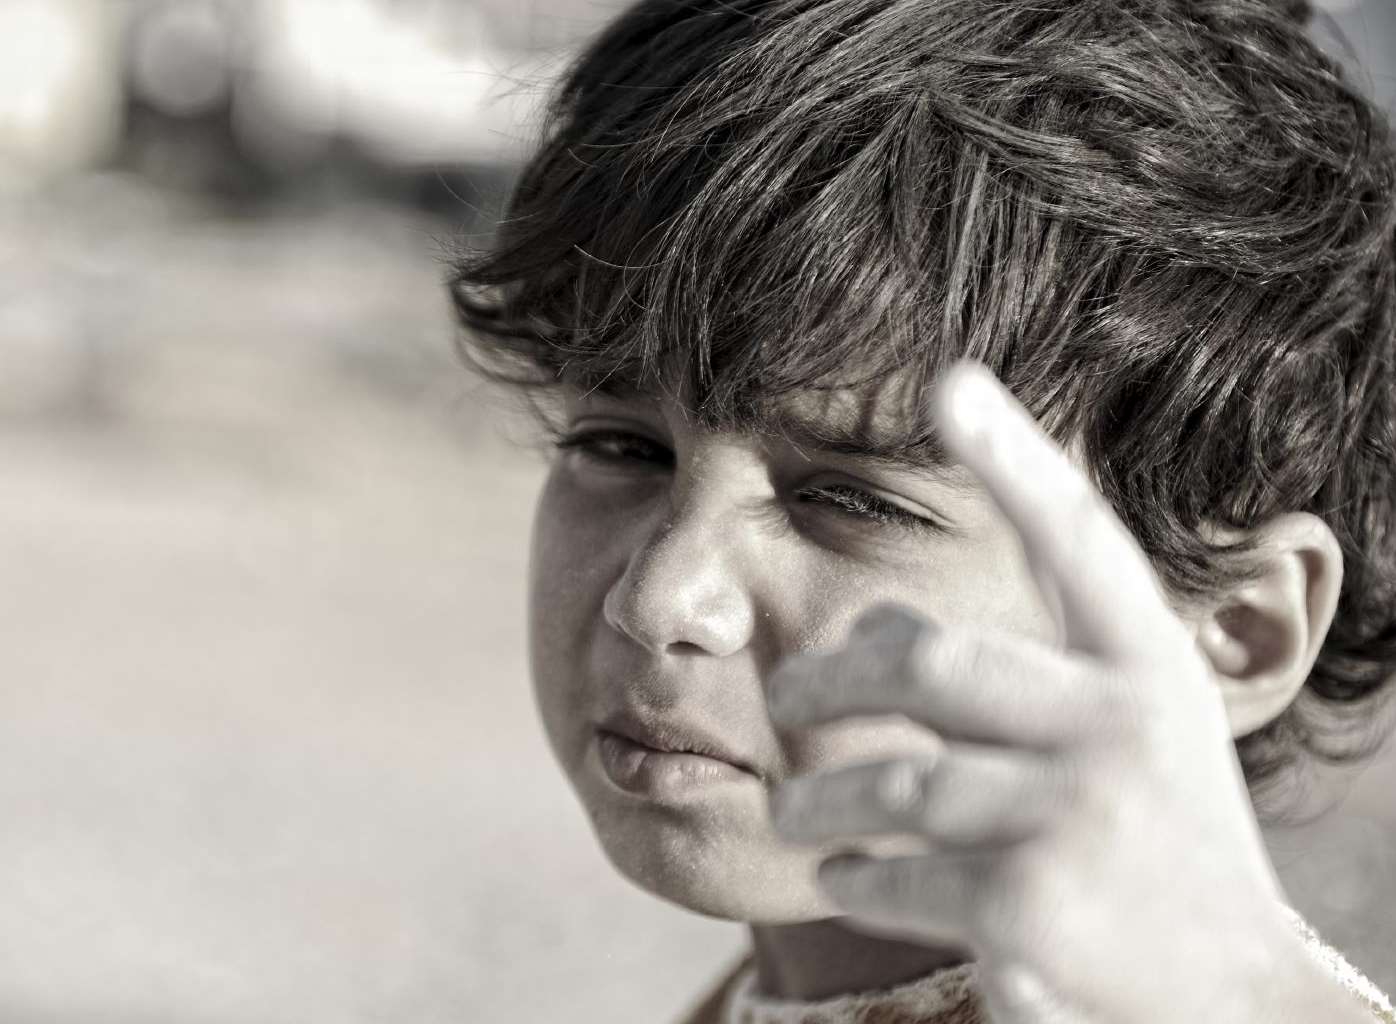 A child refugee. Stock image